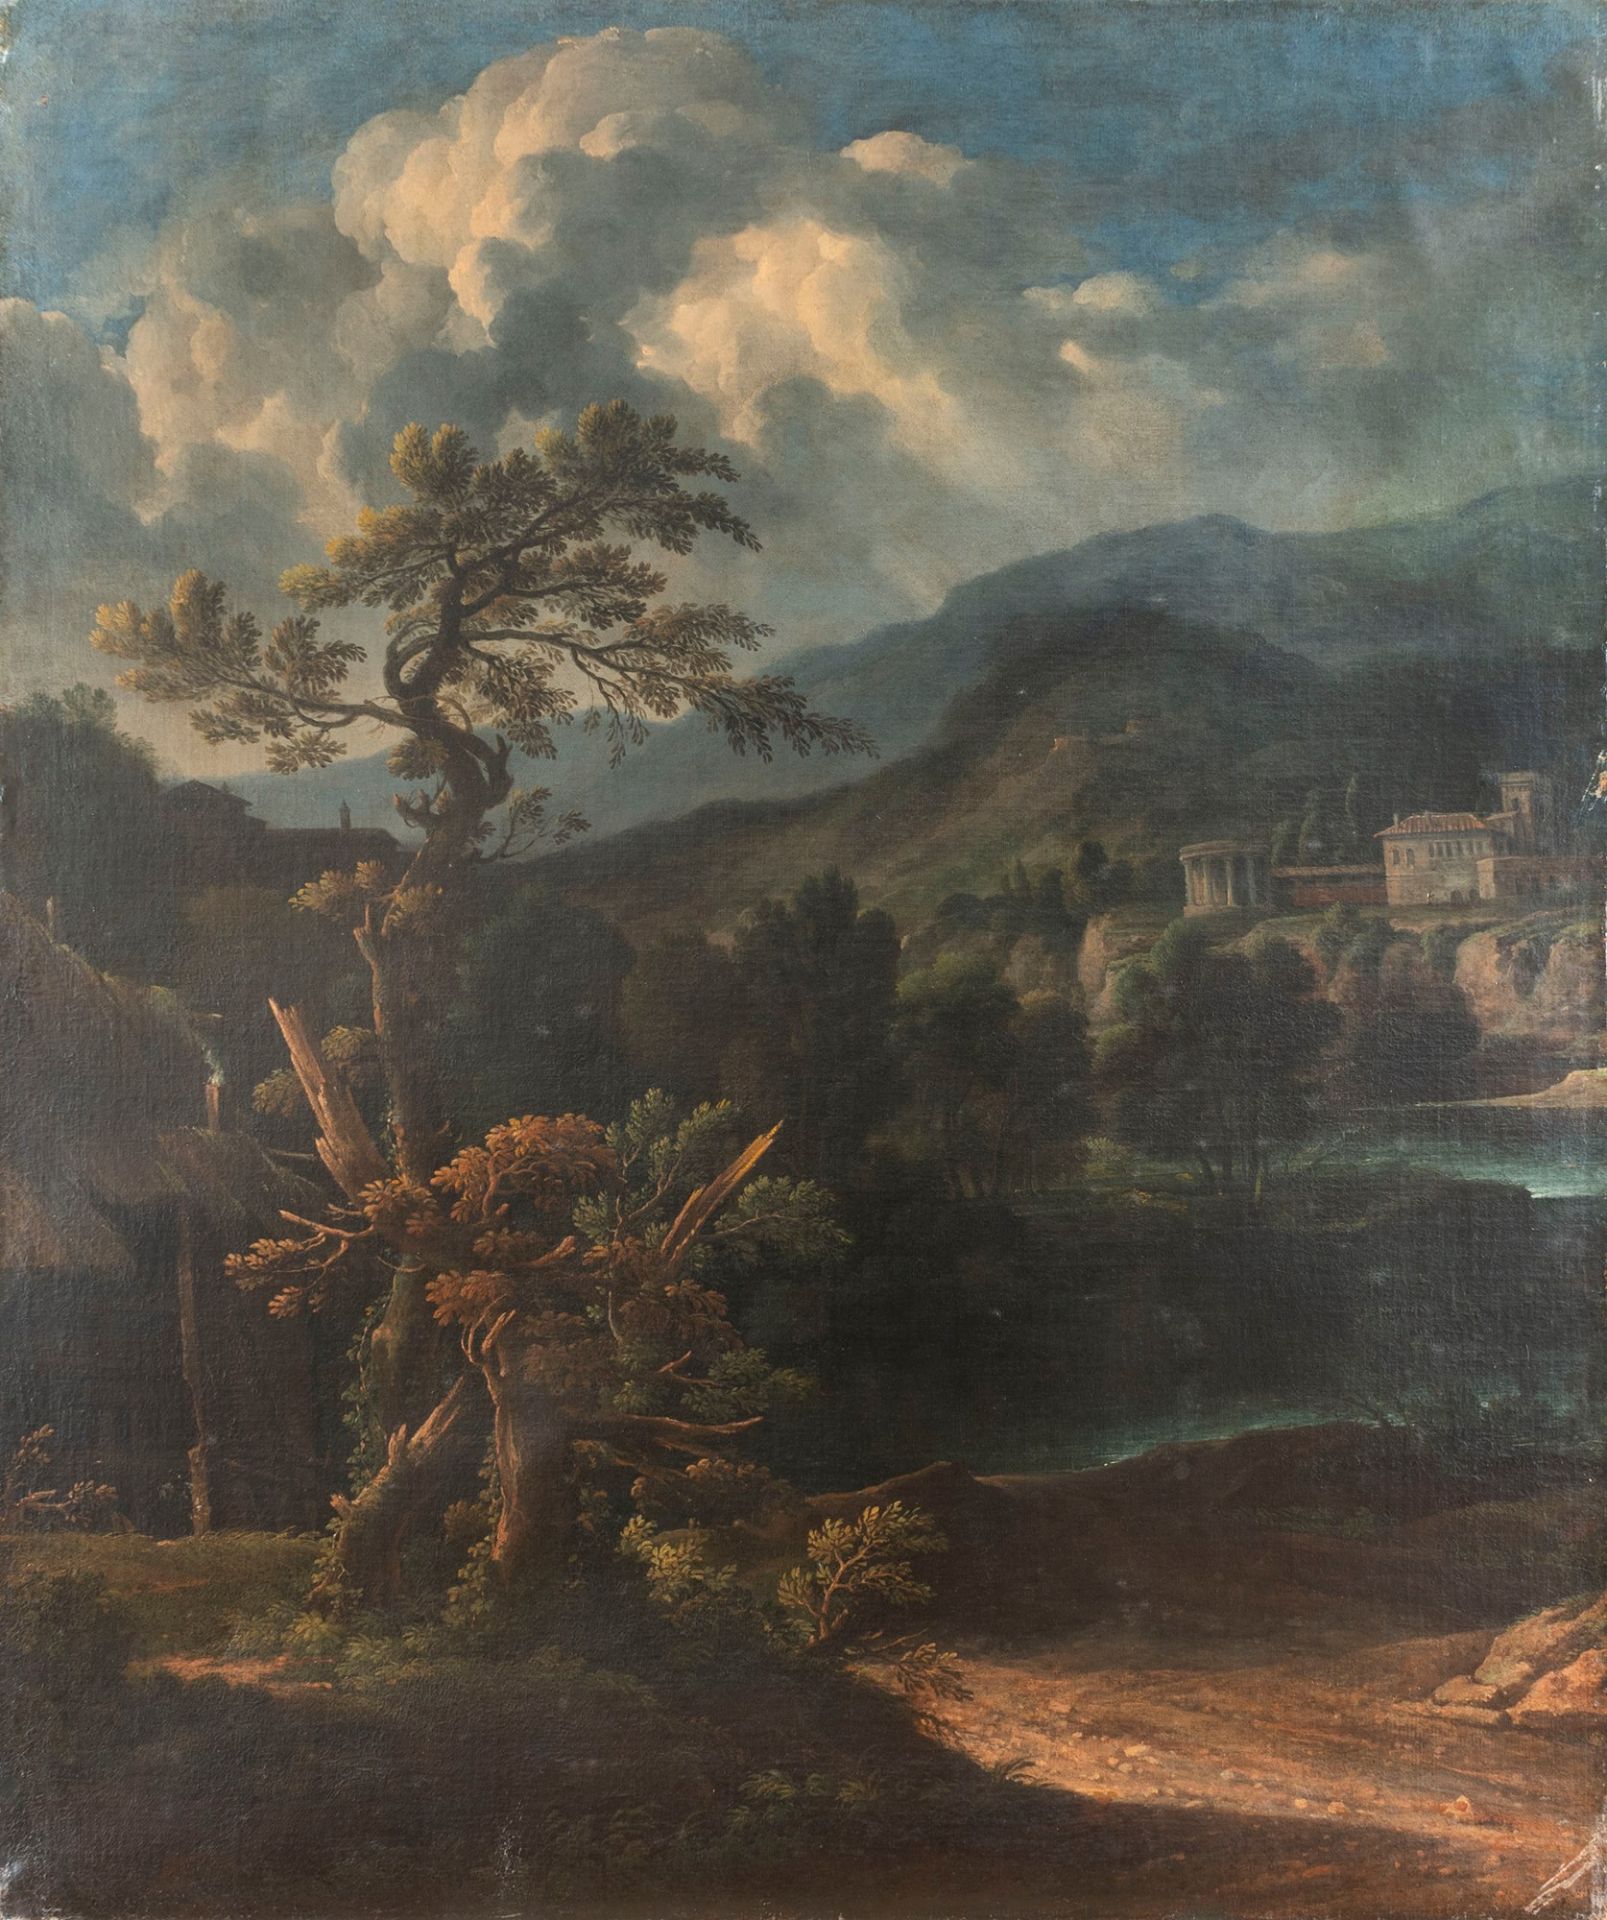 Attributed to Pieter Mulier known as the Tempest (Haarlem, 1637 – Milan, 1701) - Forest landscape wi